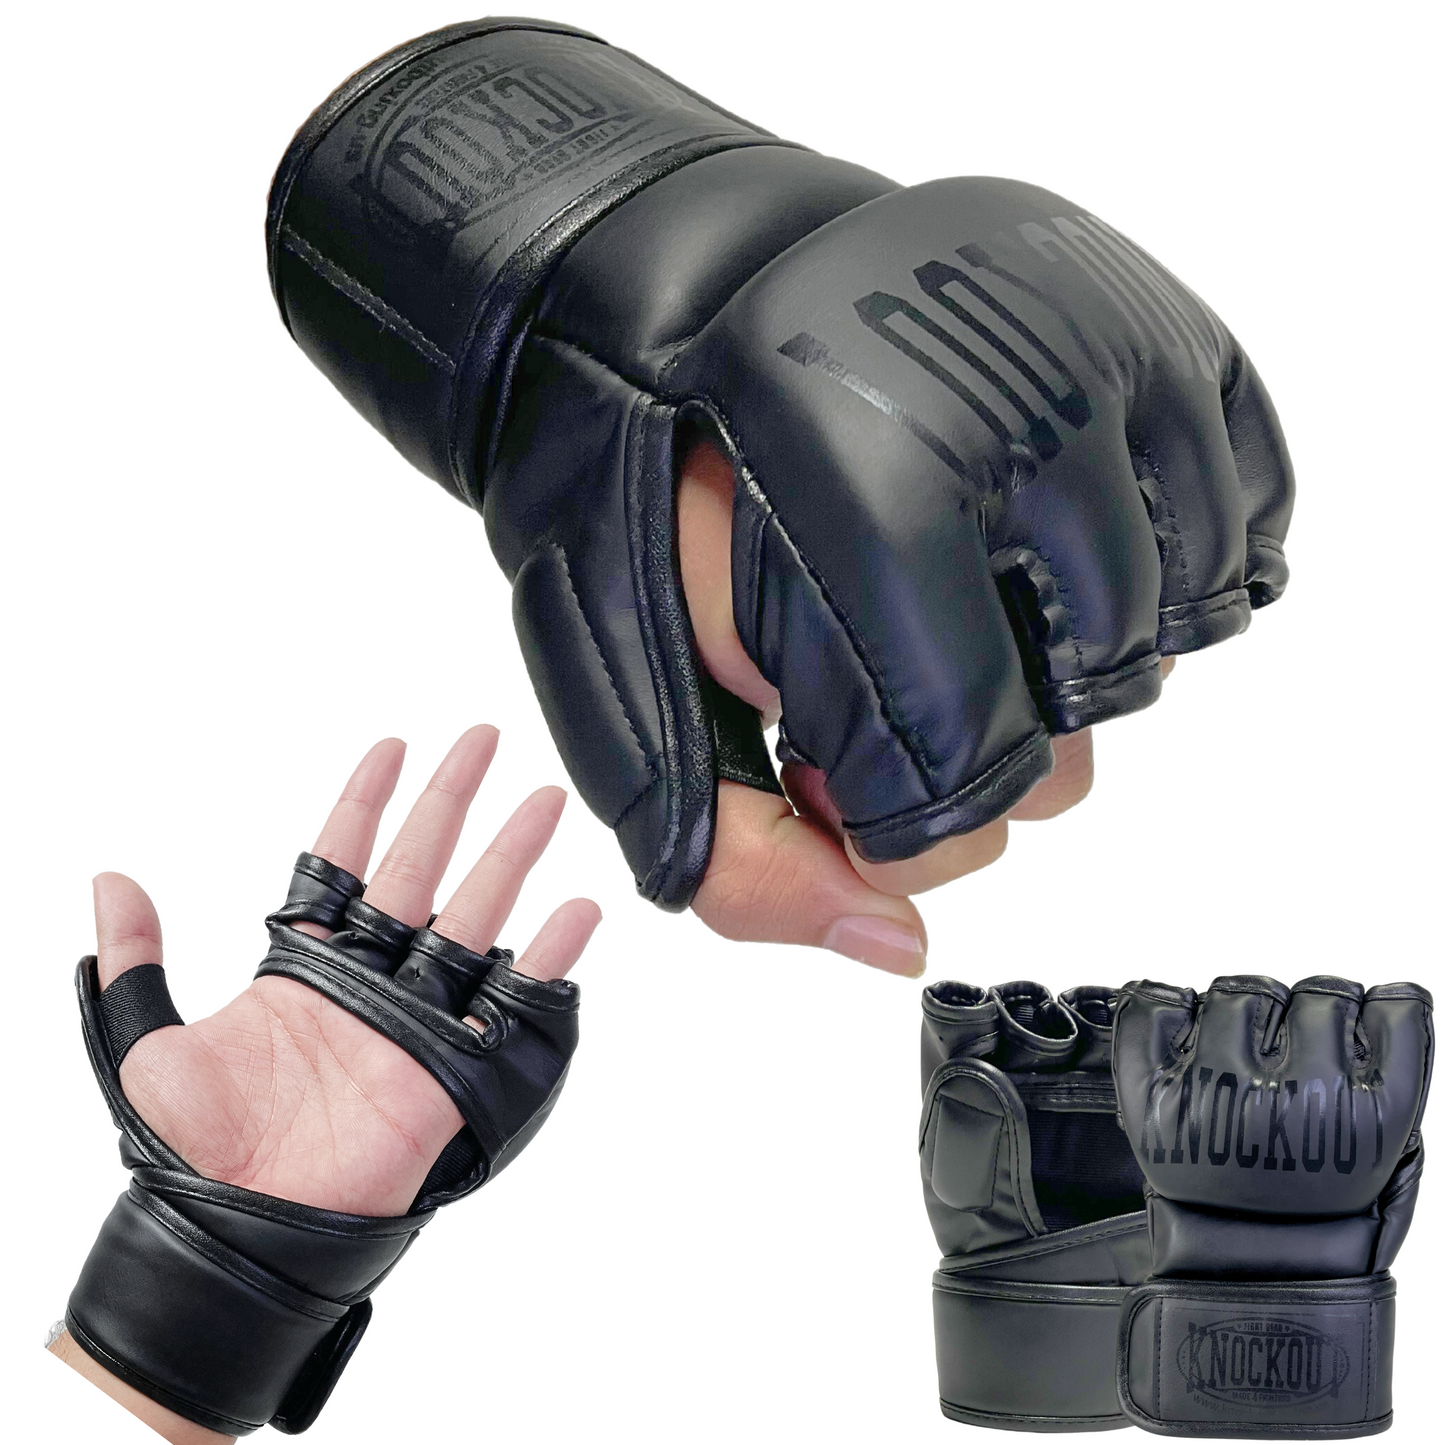 Grappling UFC MMA Gloves for Men Women, Training & Sparring, Martial Arts Punching Bag Gloves with Open Palms Kickboxing Gloves, Muay Thai, MMA